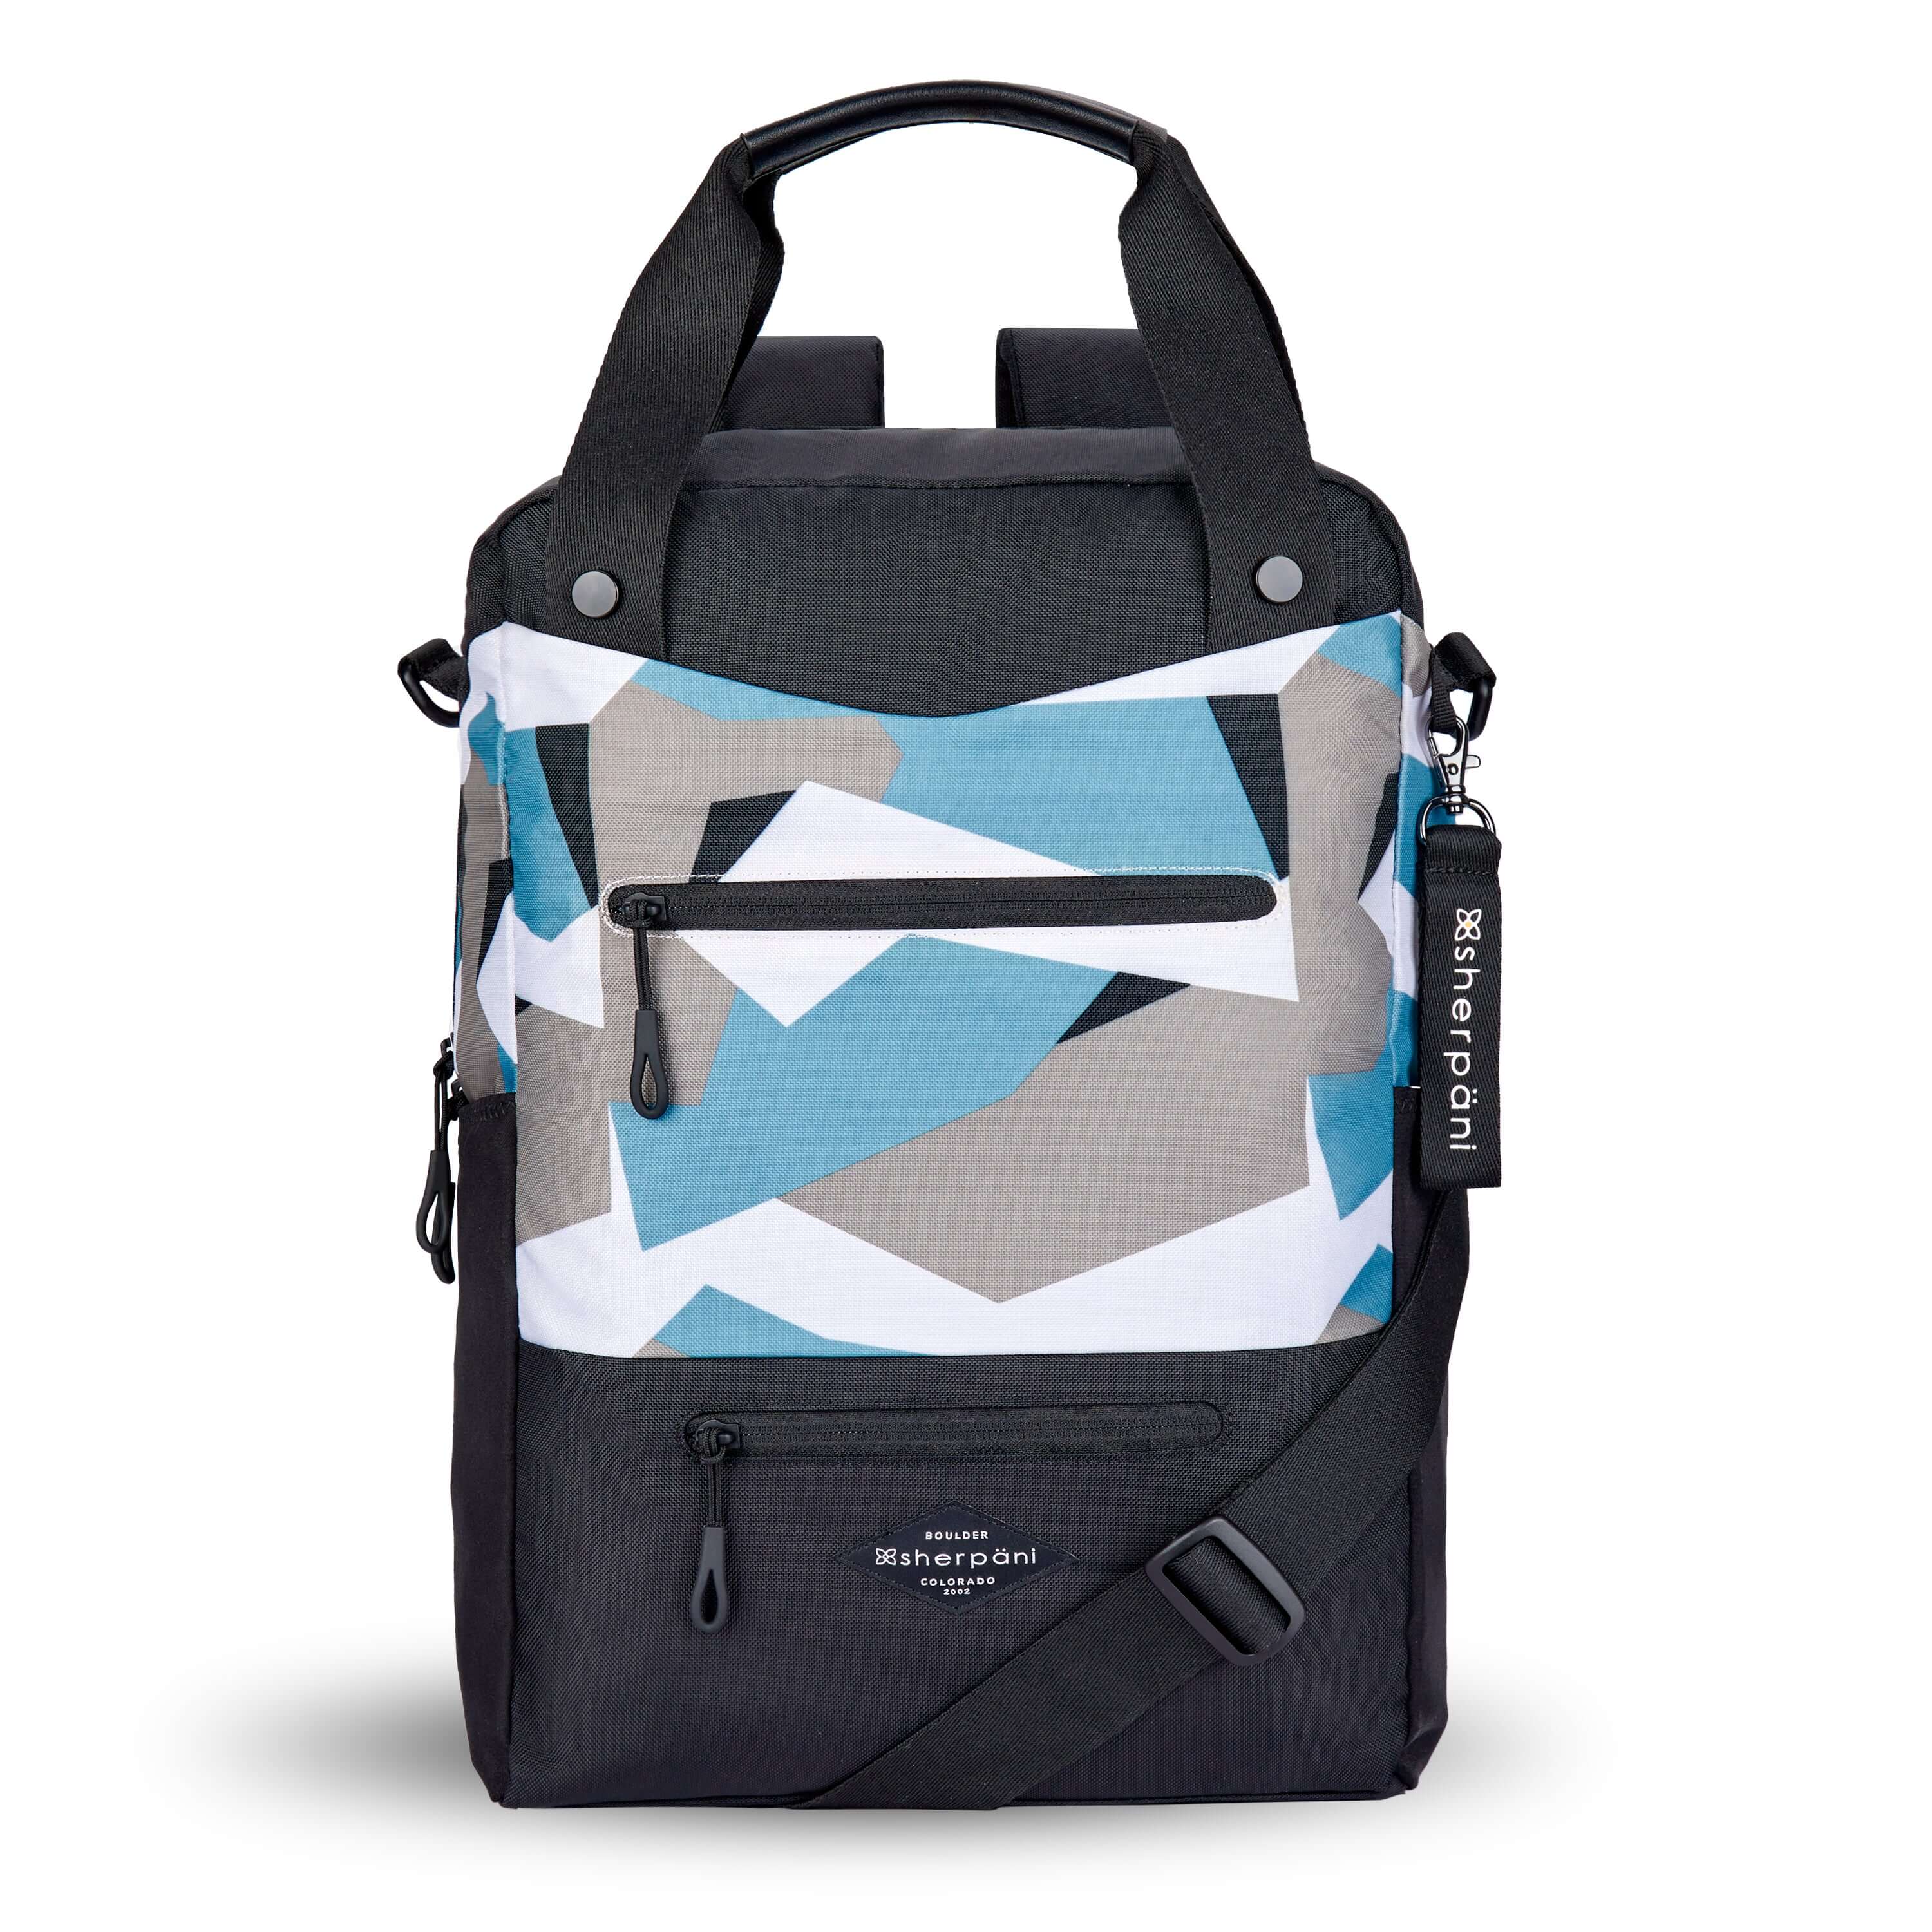 Flat front view of Sherpani's three in one bag, the Camden in Summer Camo. The bag is two toned in black and in a camouflage pattern of blue, grey and white. There are two external zipper pockets on the front panel with easy pull zippers in black. A branded Sherpani keychain is clipped to the upper right corner. An water bottle holder sits on either side of the bag. The bag has an adjustable crossbody strap, padded/adjustable backpack straps and short tote handles fixed at the top. 